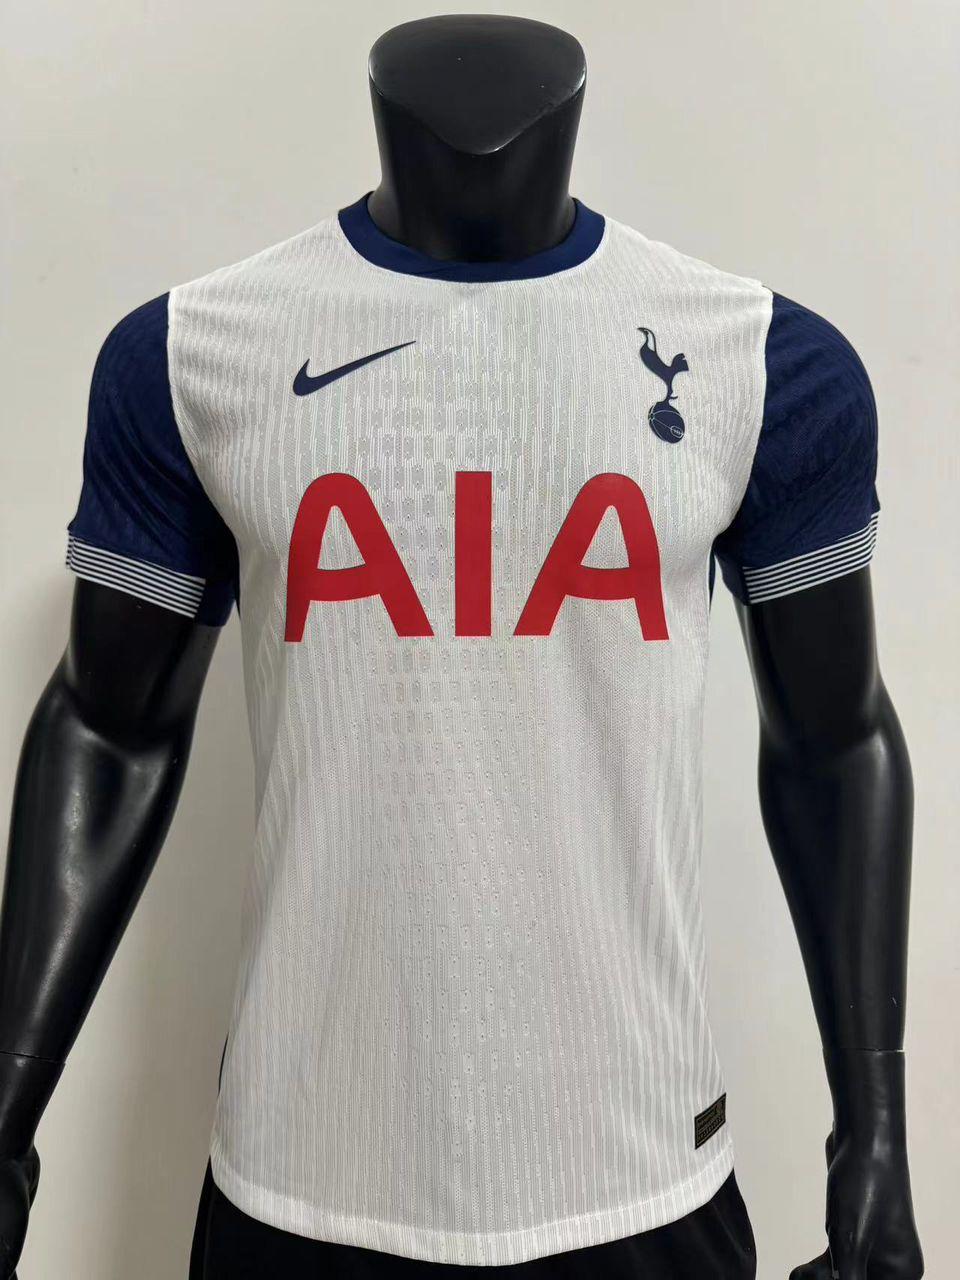 TOTTENHAM 24/25 HOME JERSEY PLAYER VERSION QUALITY